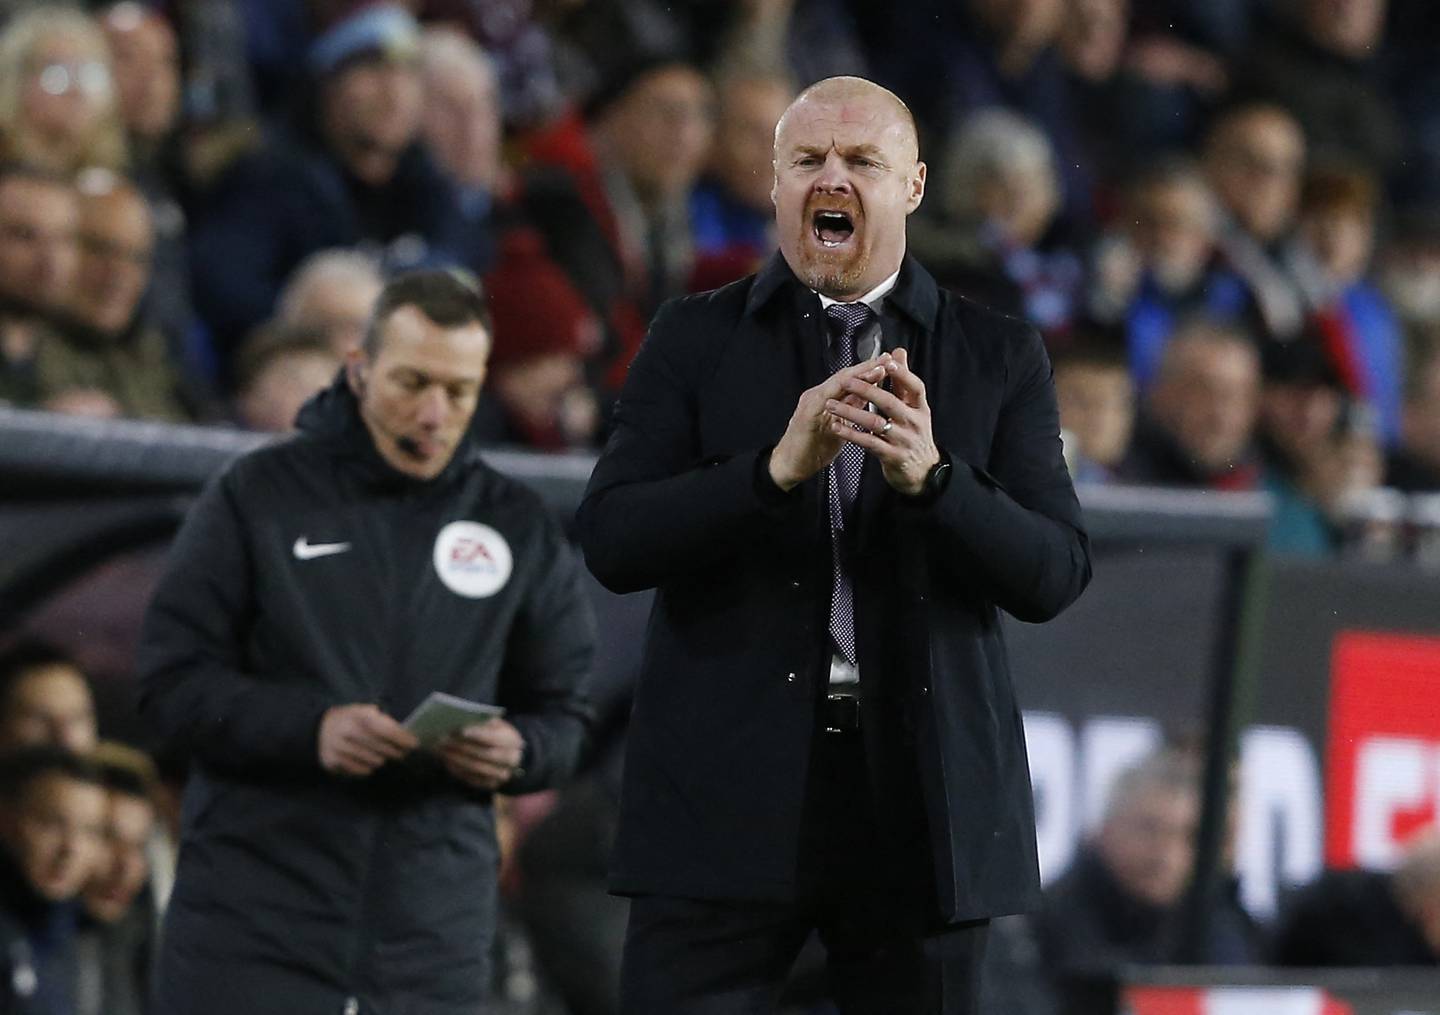 Burnley manager Sean Dyche at Turf Moor. Reuters